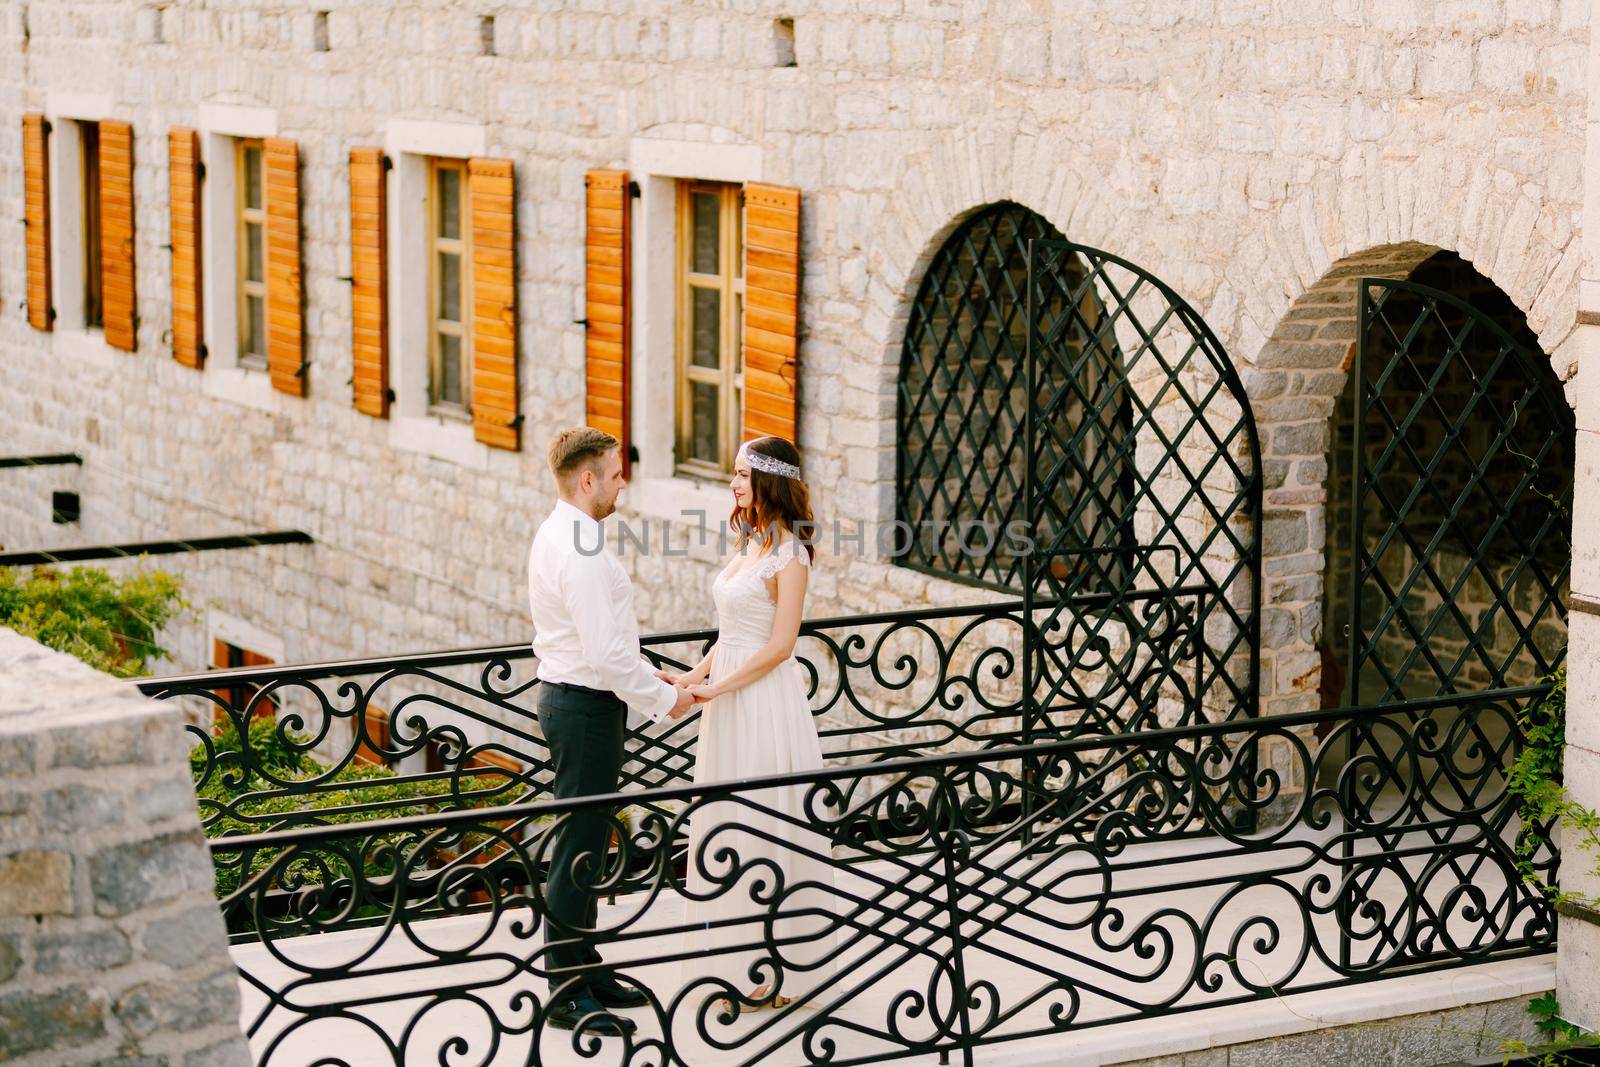 The bride and groom stand on a beautiful forged bridge in the old town of Budva holding hands and looking into each other's eyes by Nadtochiy